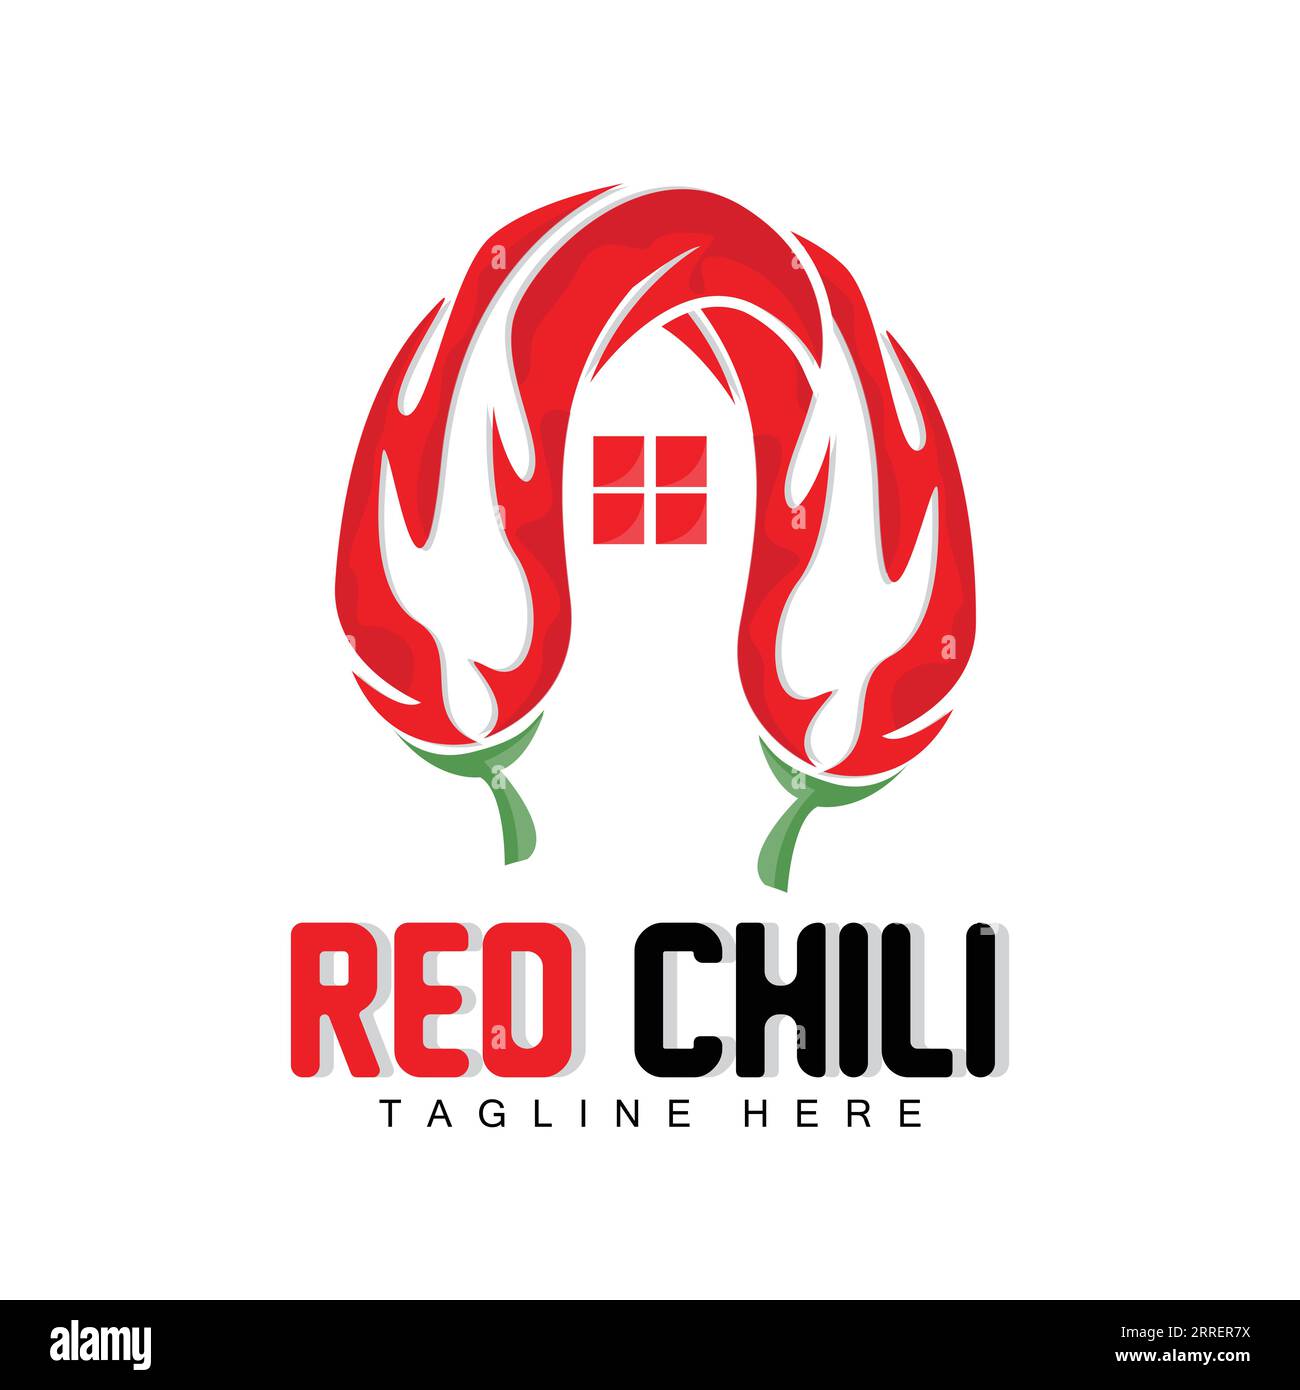 Red Chili Logo, Hot Chili Peppers Vector, Chili Garden House Illustration, Company Product Brand Illustration Stock Vector